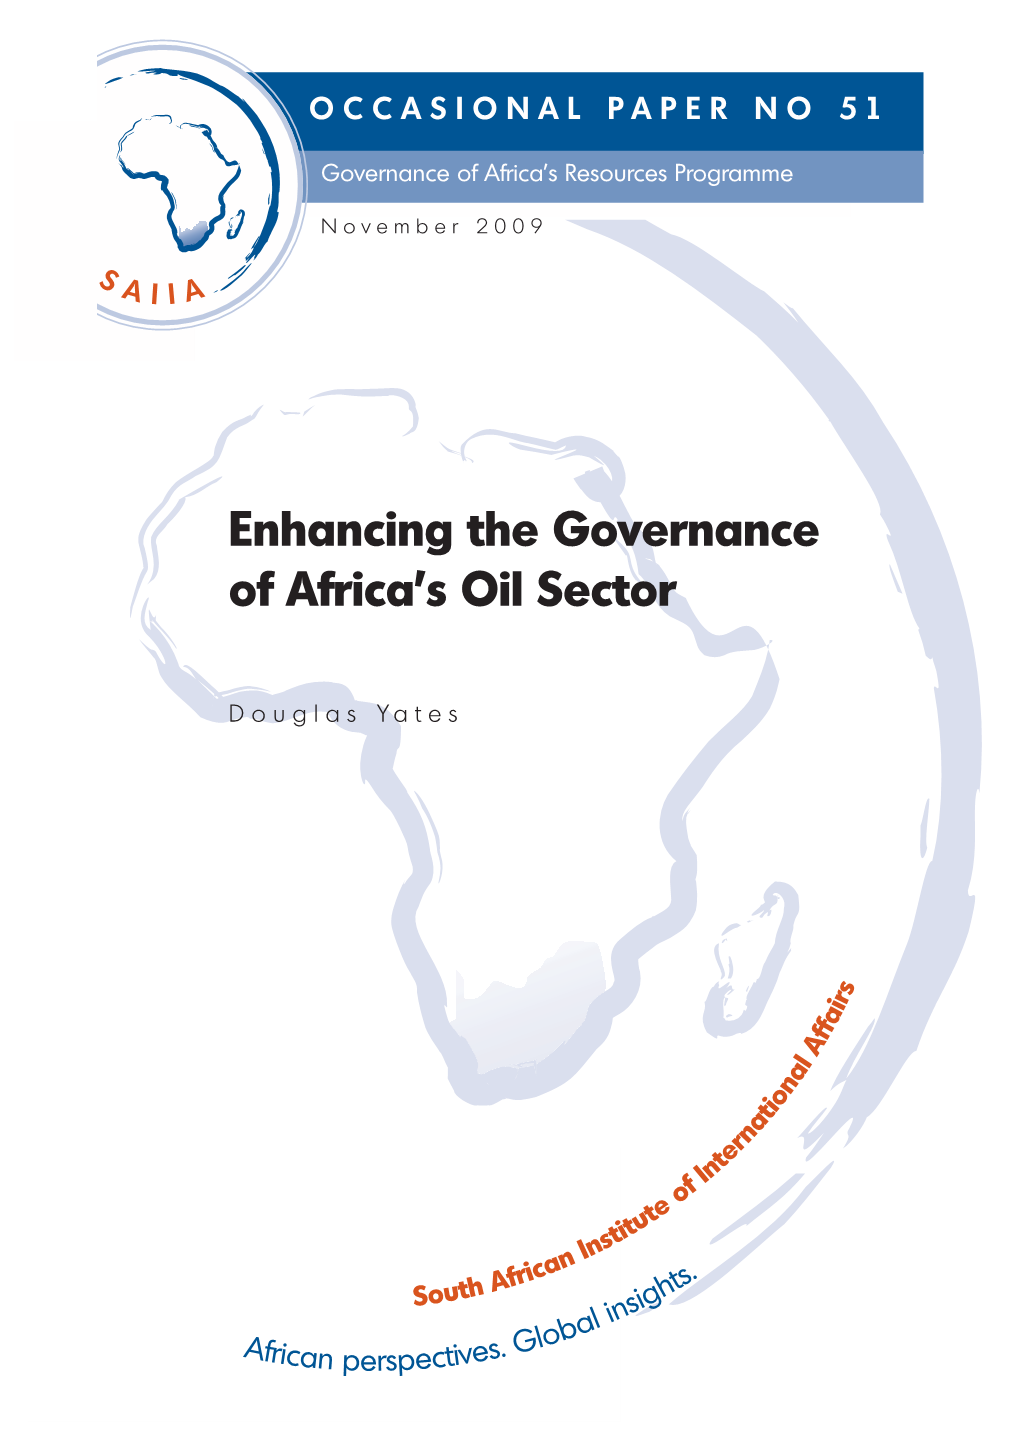 Enhancing the Governance of Africa's Oil Sector